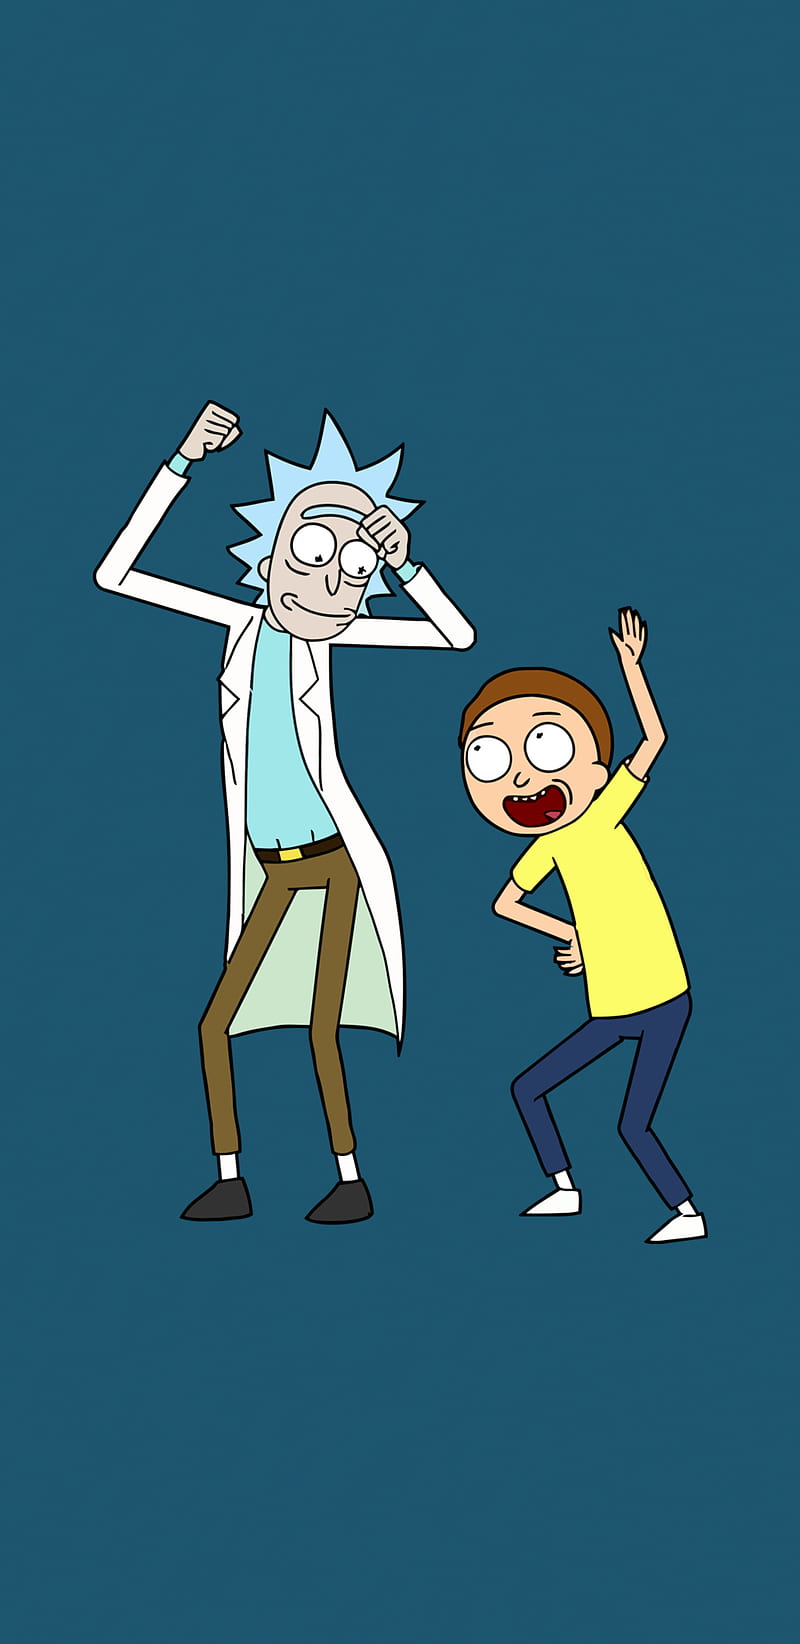 Rick and Morty, adult swim, animated, back to the future, cartoon network, justin roiland, netflix, warner bros, HD phone wallpaper